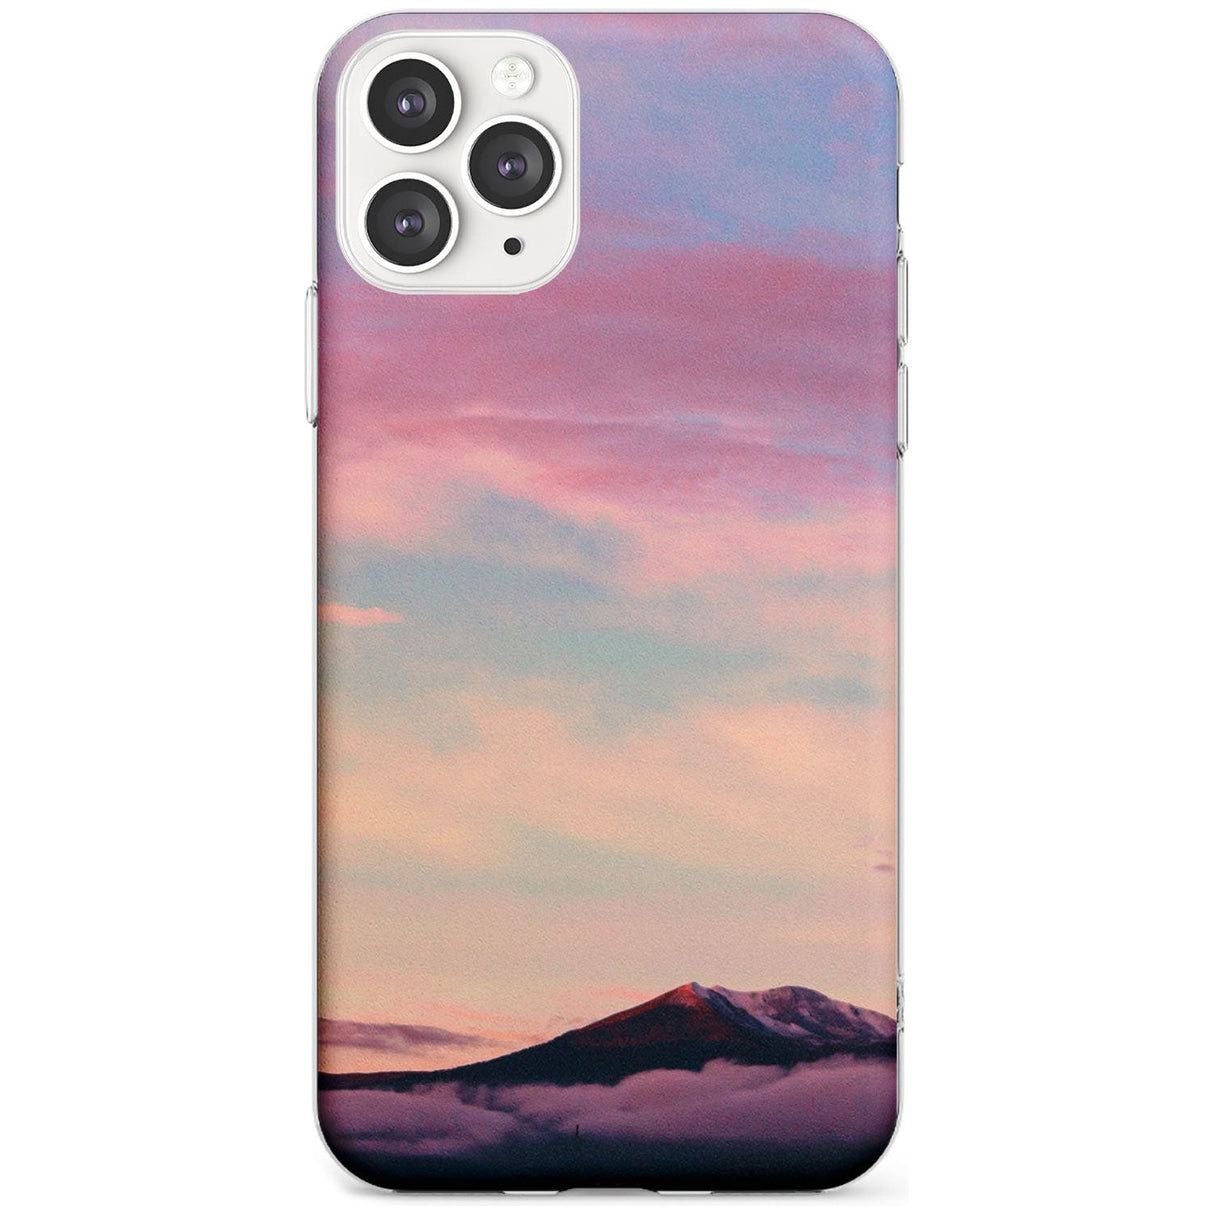 Cloudy Sunset Photograph Slim TPU Phone Case for iPhone 11 Pro Max